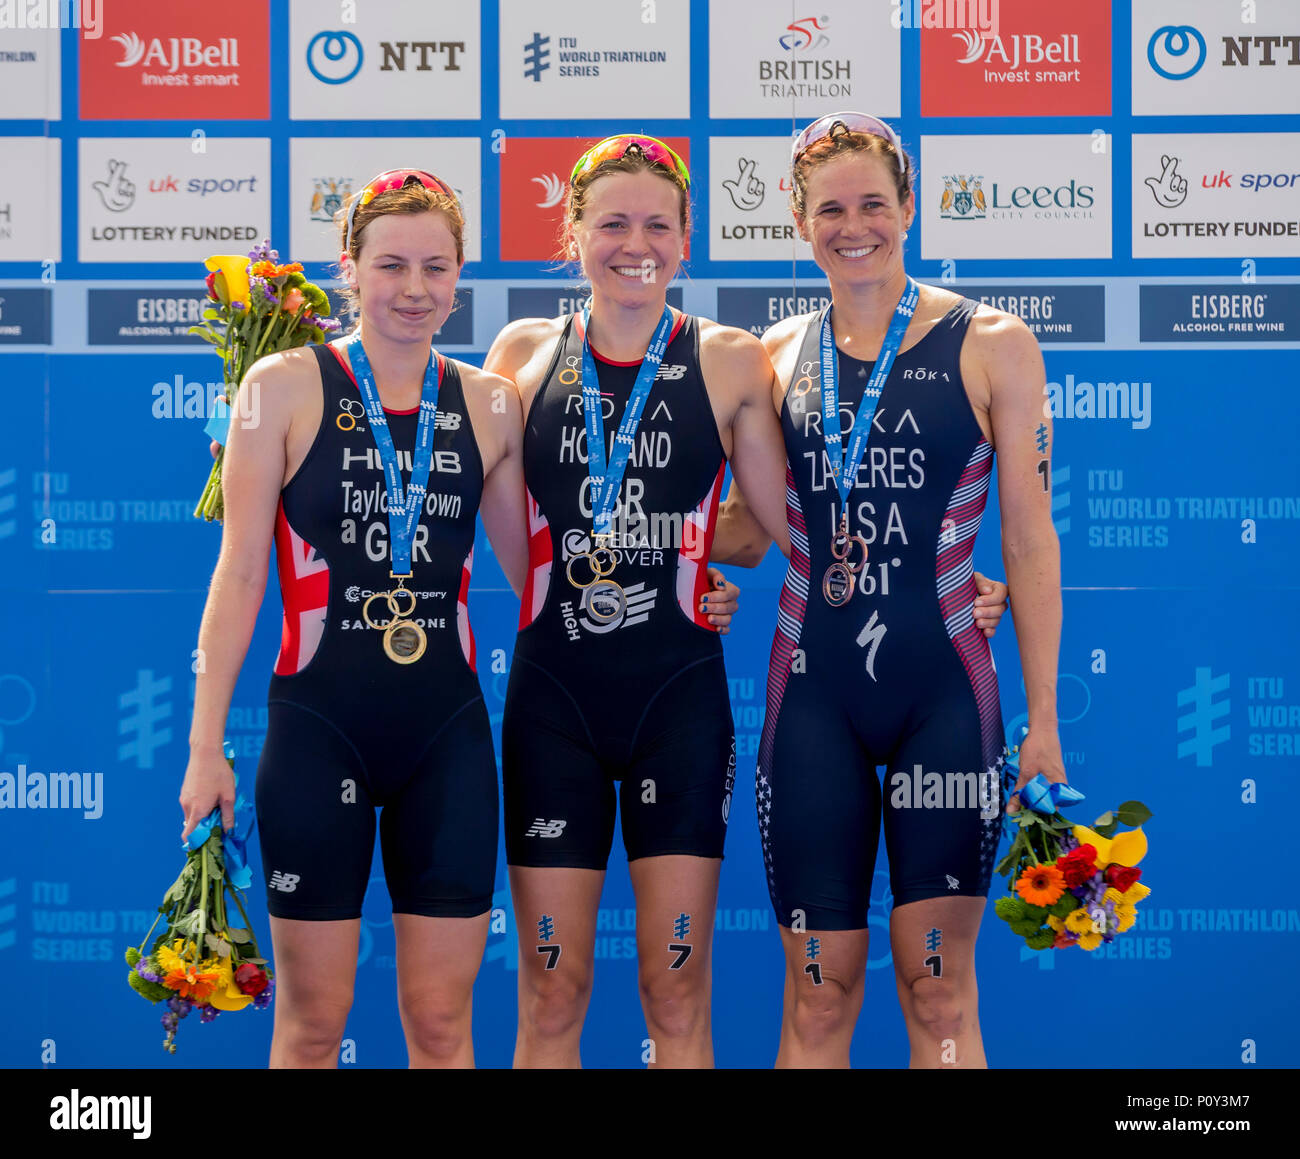 Leeds, UK. 10th June, 2018. AJ Bell World Triathlon Series, Leeds; Jessica Learmonth (GBR) on the podium wearing her medal after winning the Elite Womens race along with Georgia Taylor Brown (GBR) and Katie Zaferes who came second and third places respectively Credit: Action Plus Sports/Alamy Live News Stock Photo